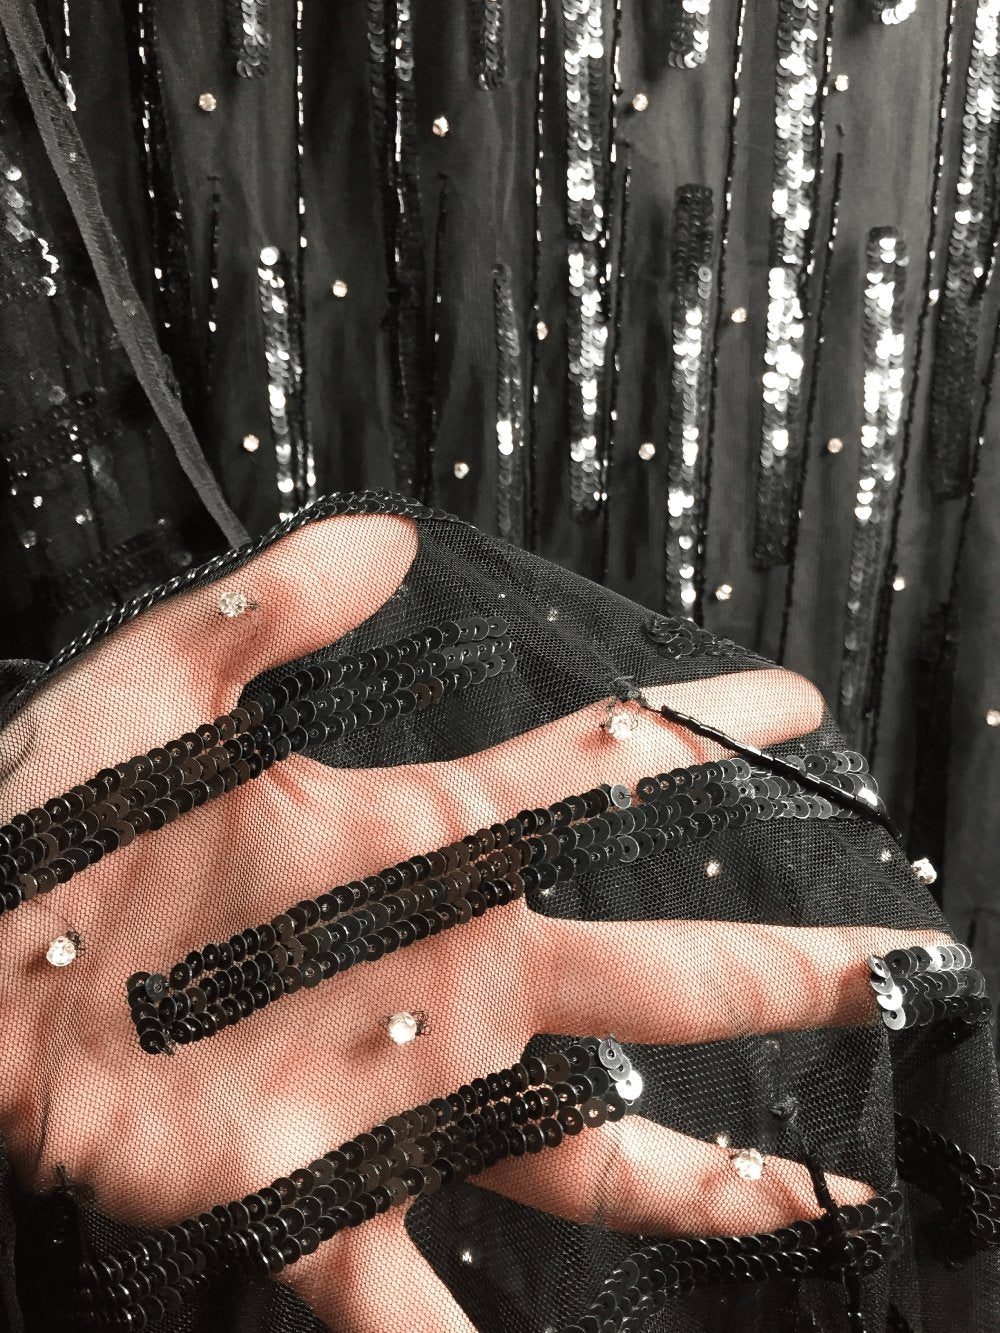 Handmade Black sequins&fringes with crystal stones lace